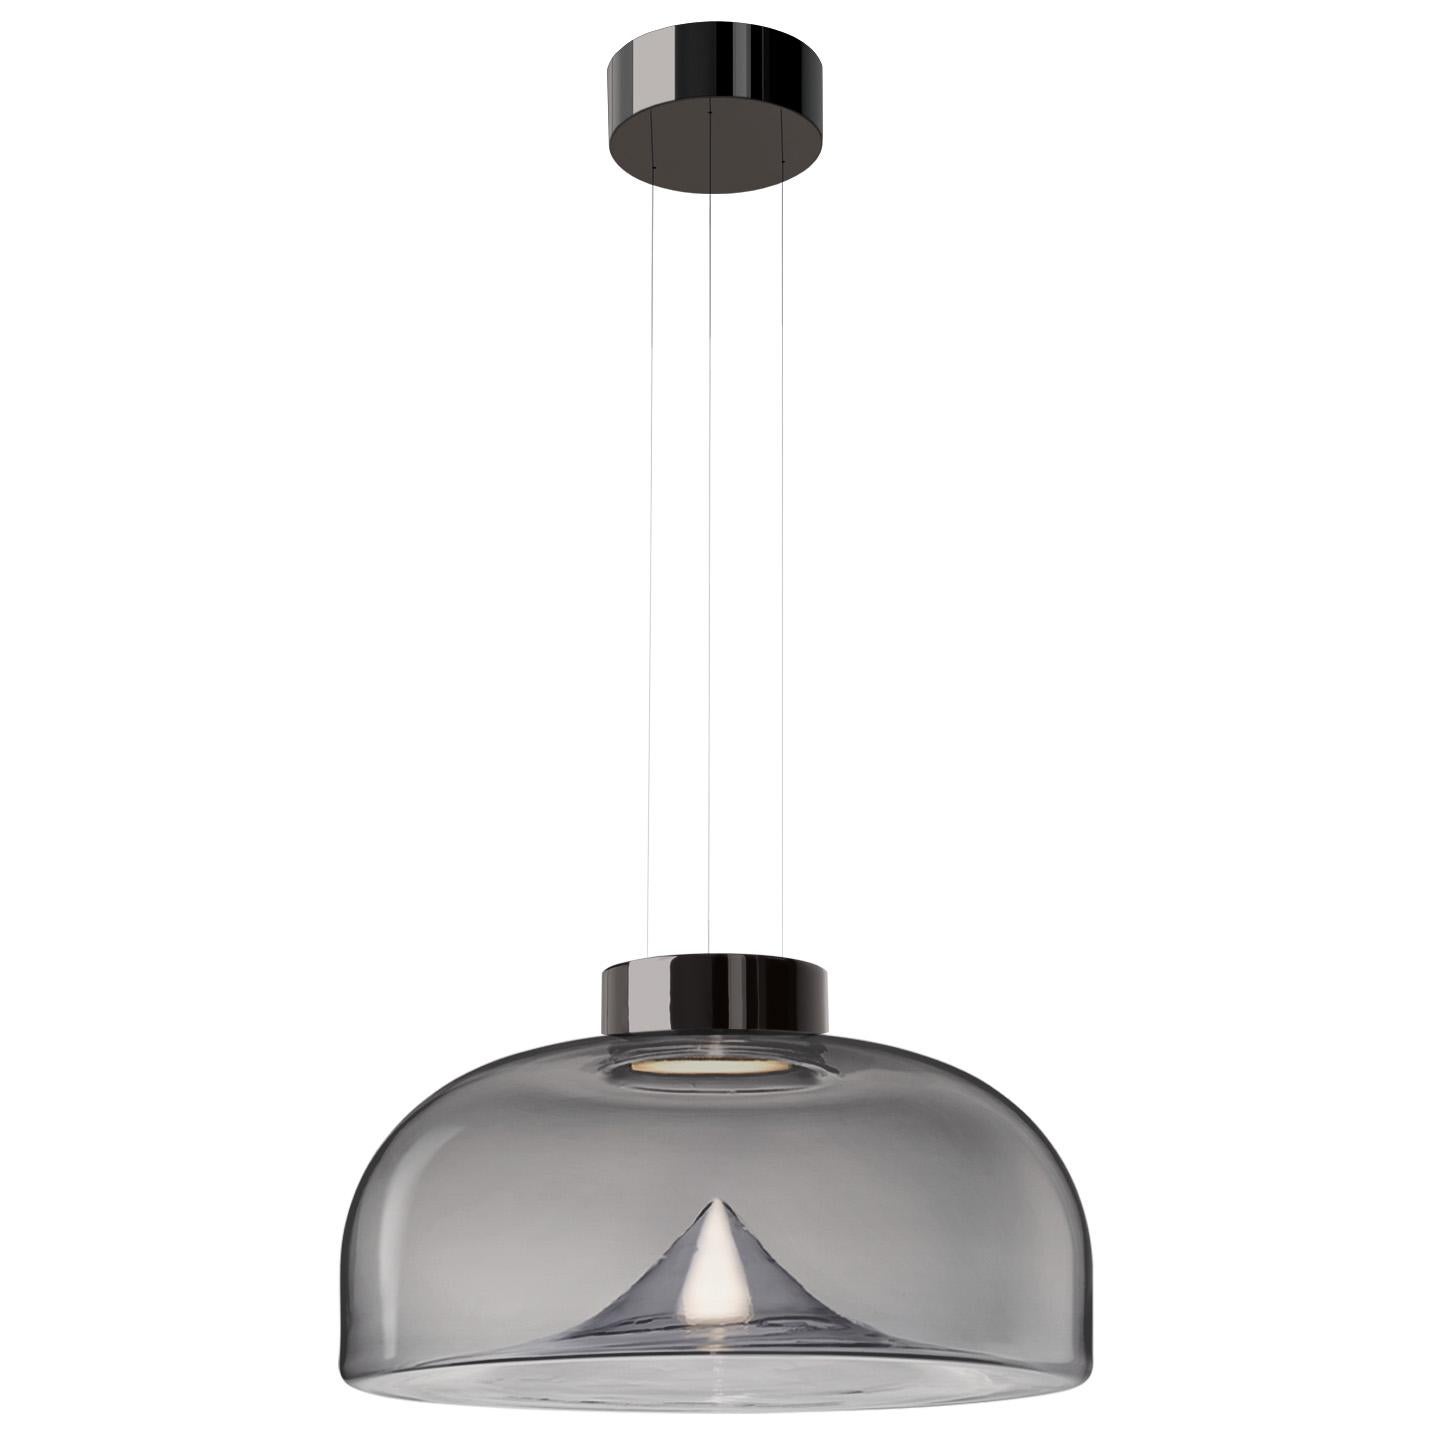 Leucos Aella S LED Pendant Light in Smoke Gray and Gunmetal by Toso & Massari For Sale